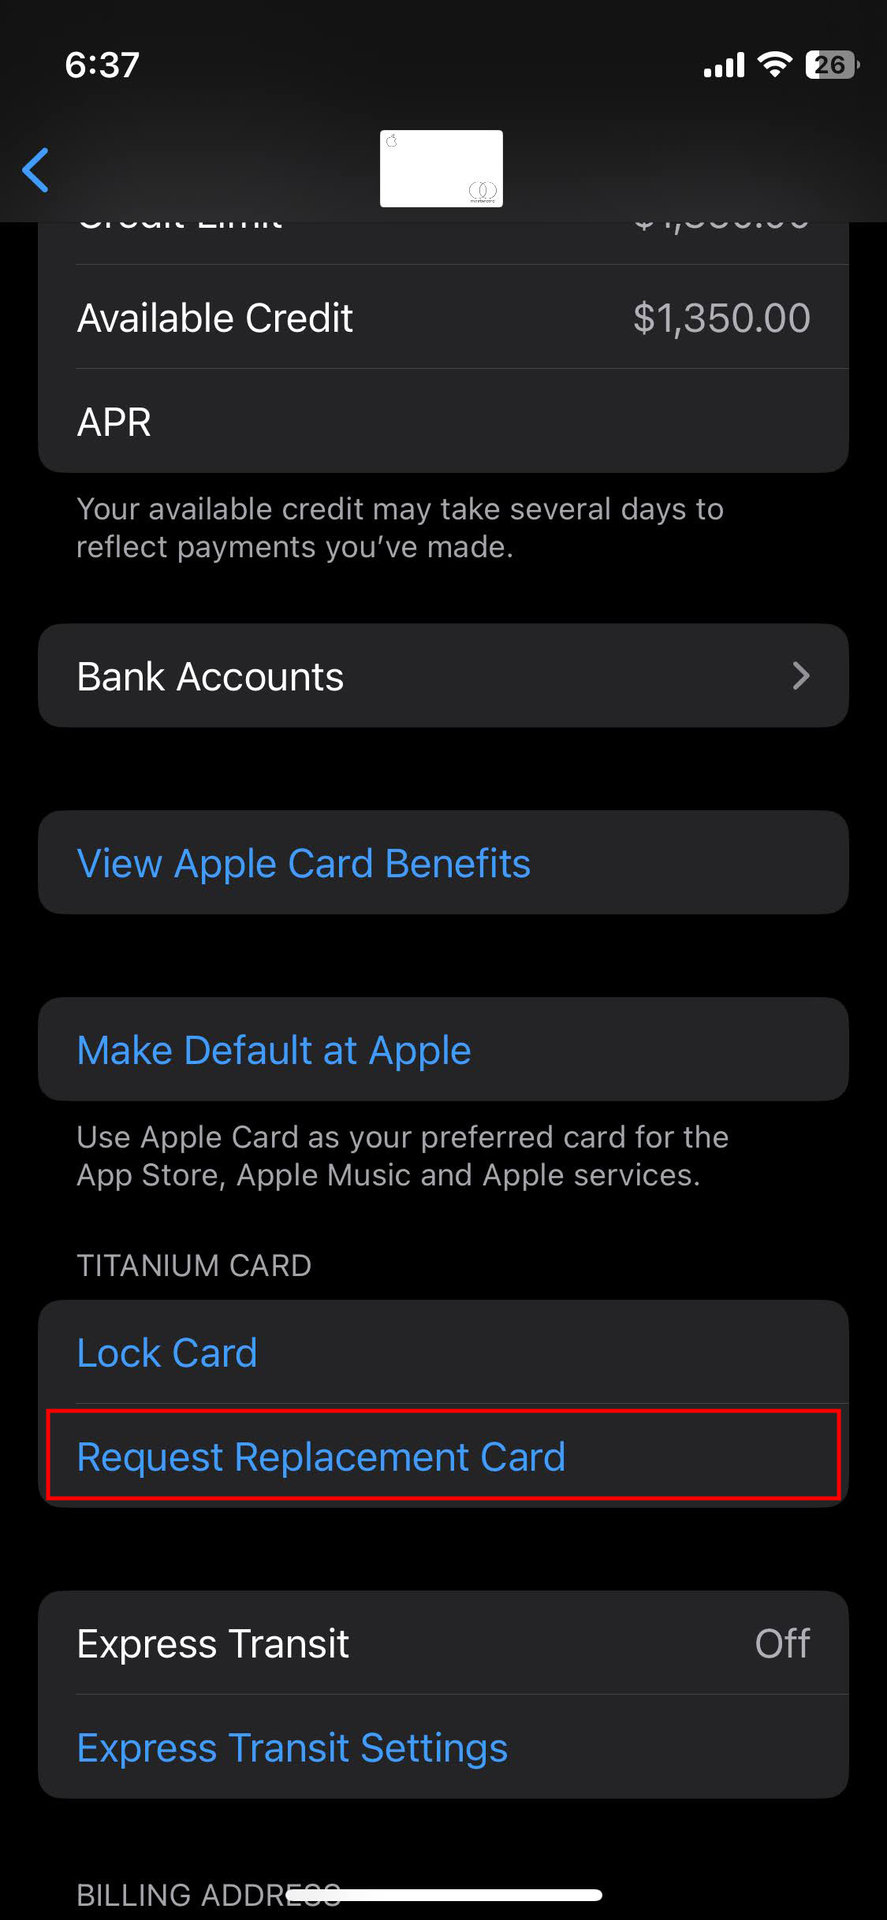 How to request an Apple Titanium Card (4)